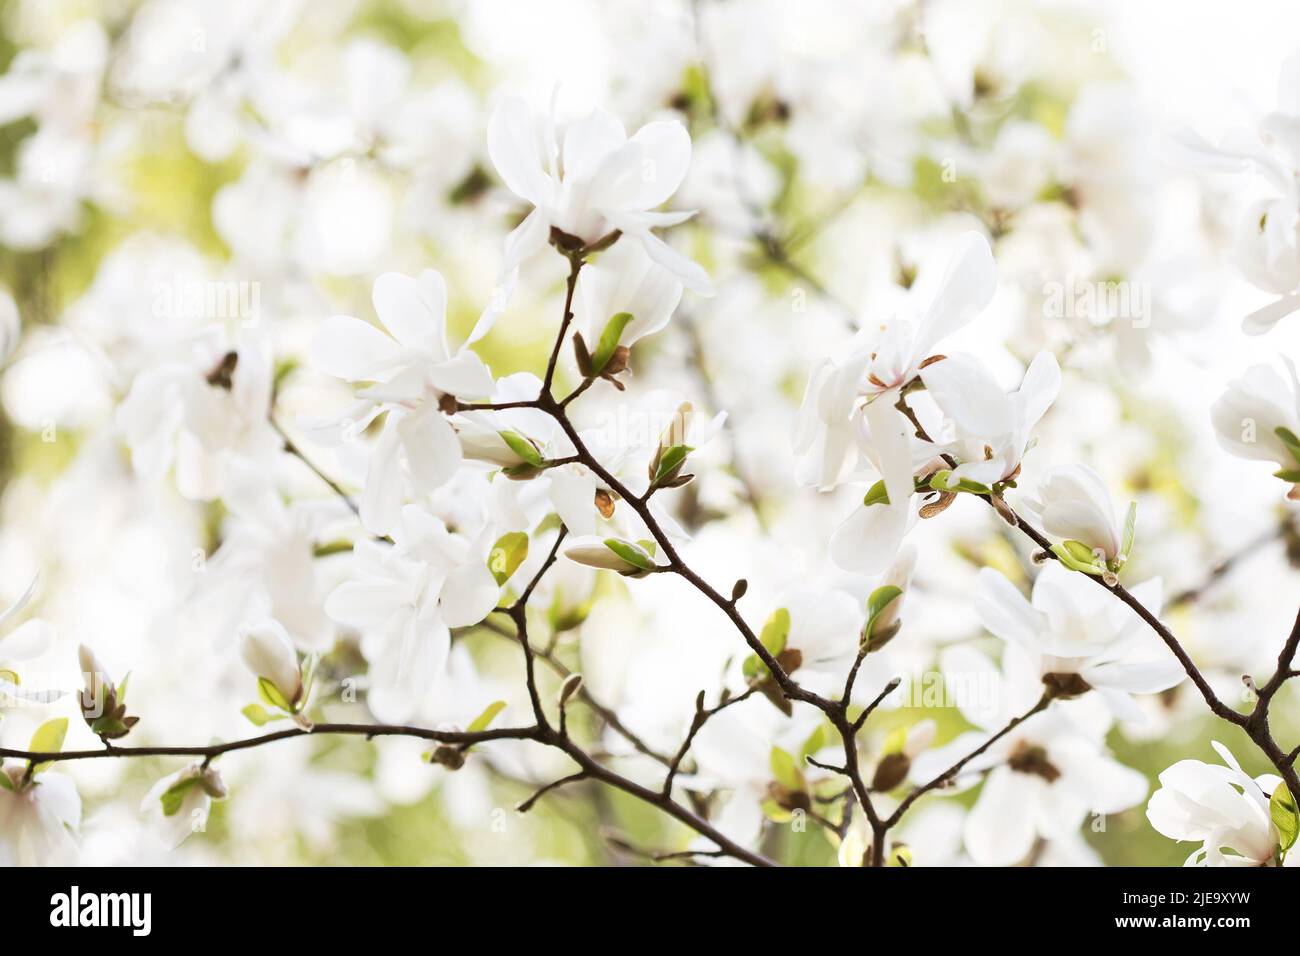 Magnolia blossom, Japanese garden. Spring nature, flowers with white petals Stock Photo